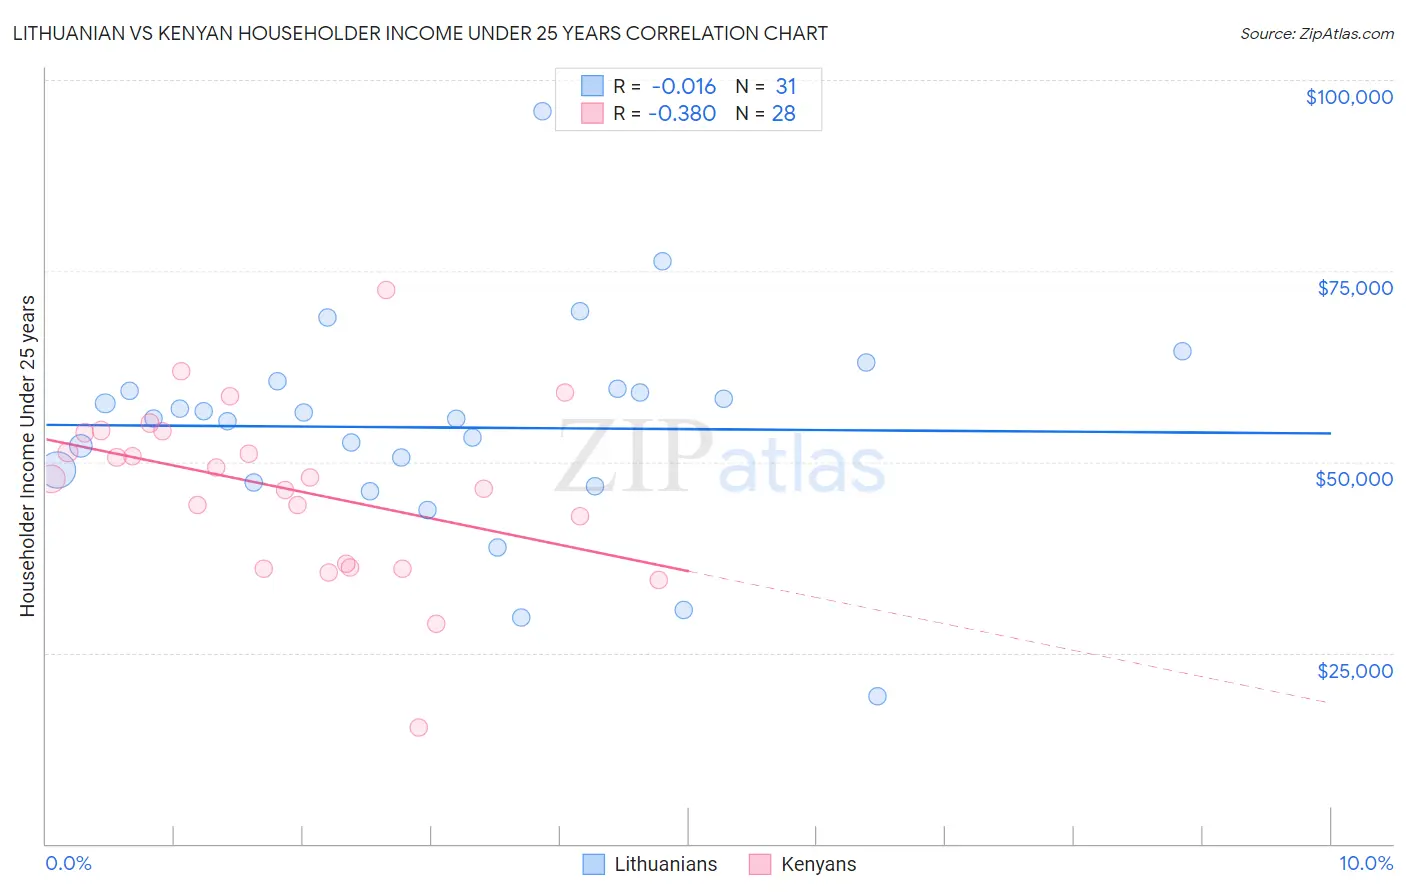 Lithuanian vs Kenyan Householder Income Under 25 years